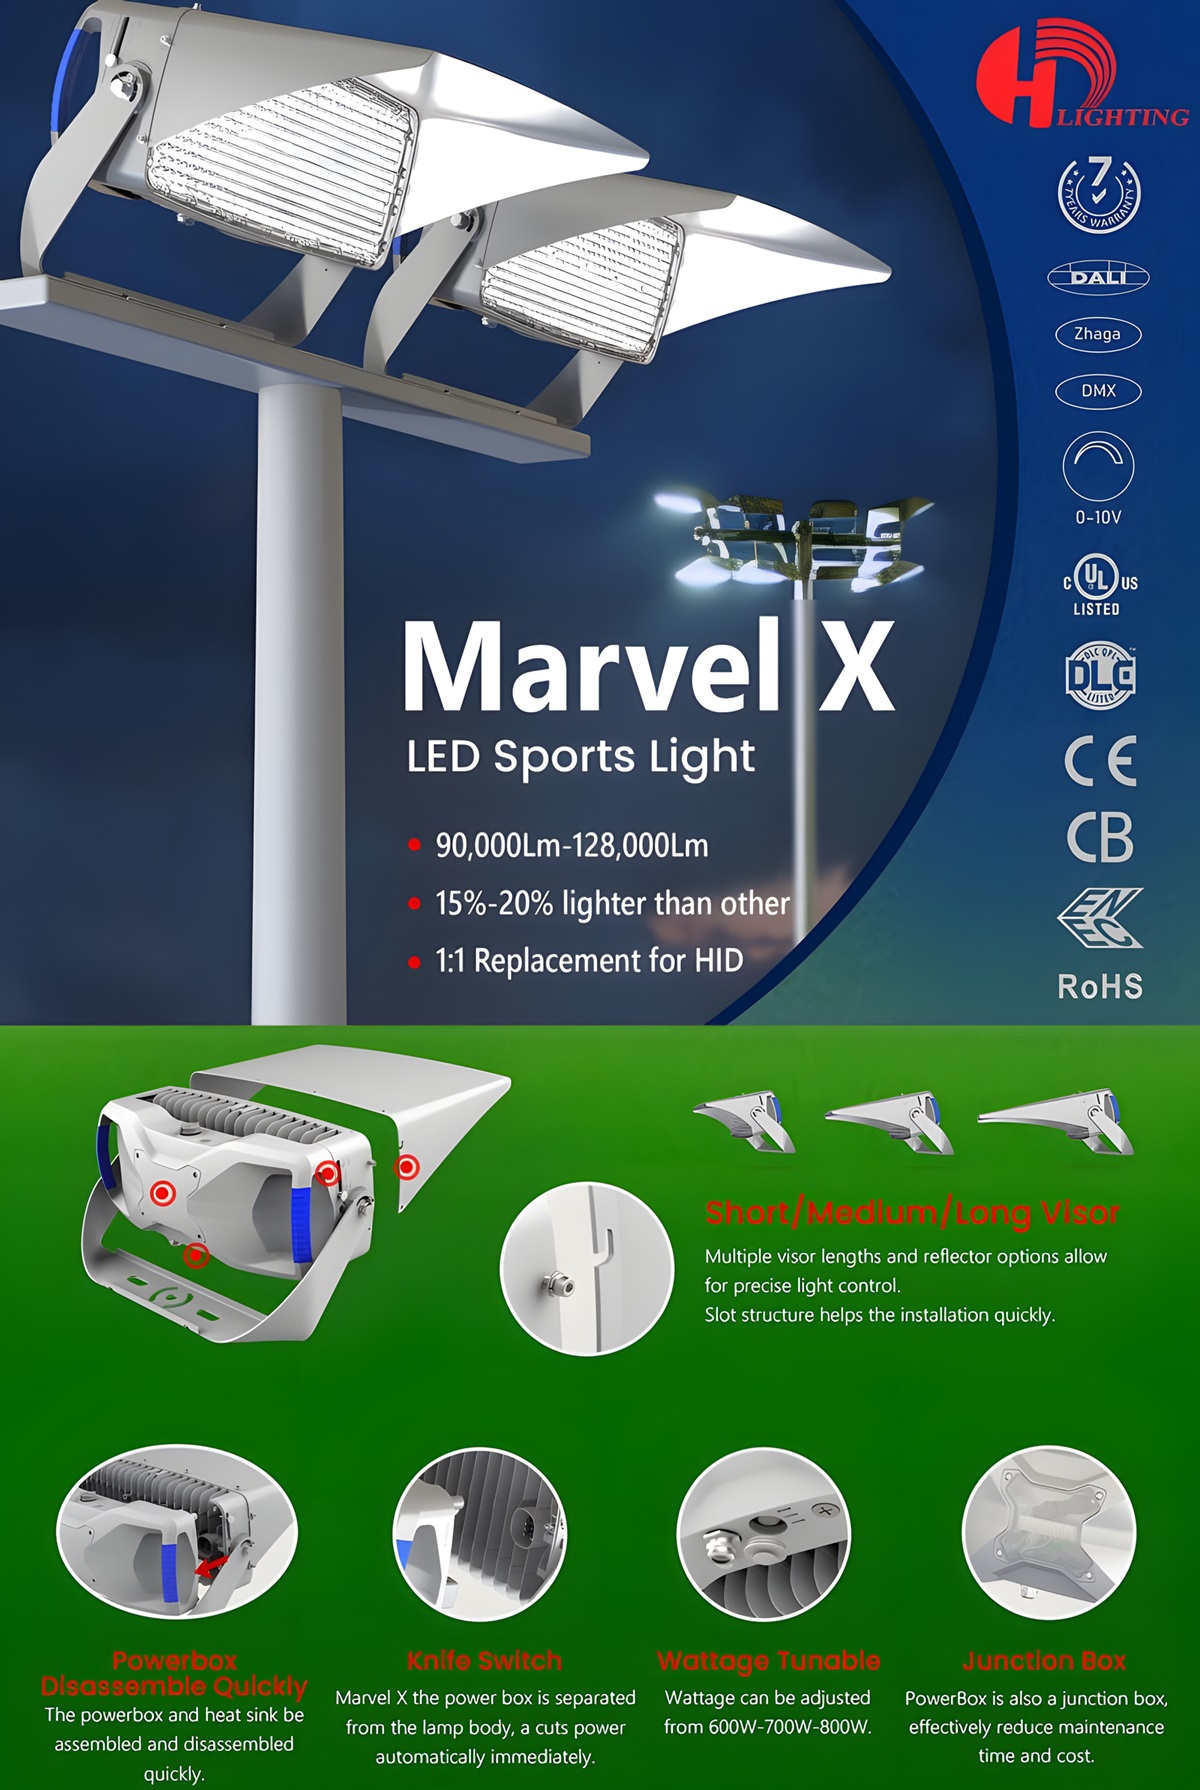 Huadian Lighting Announces the All-Purpose Marvel X T19 Floodlight